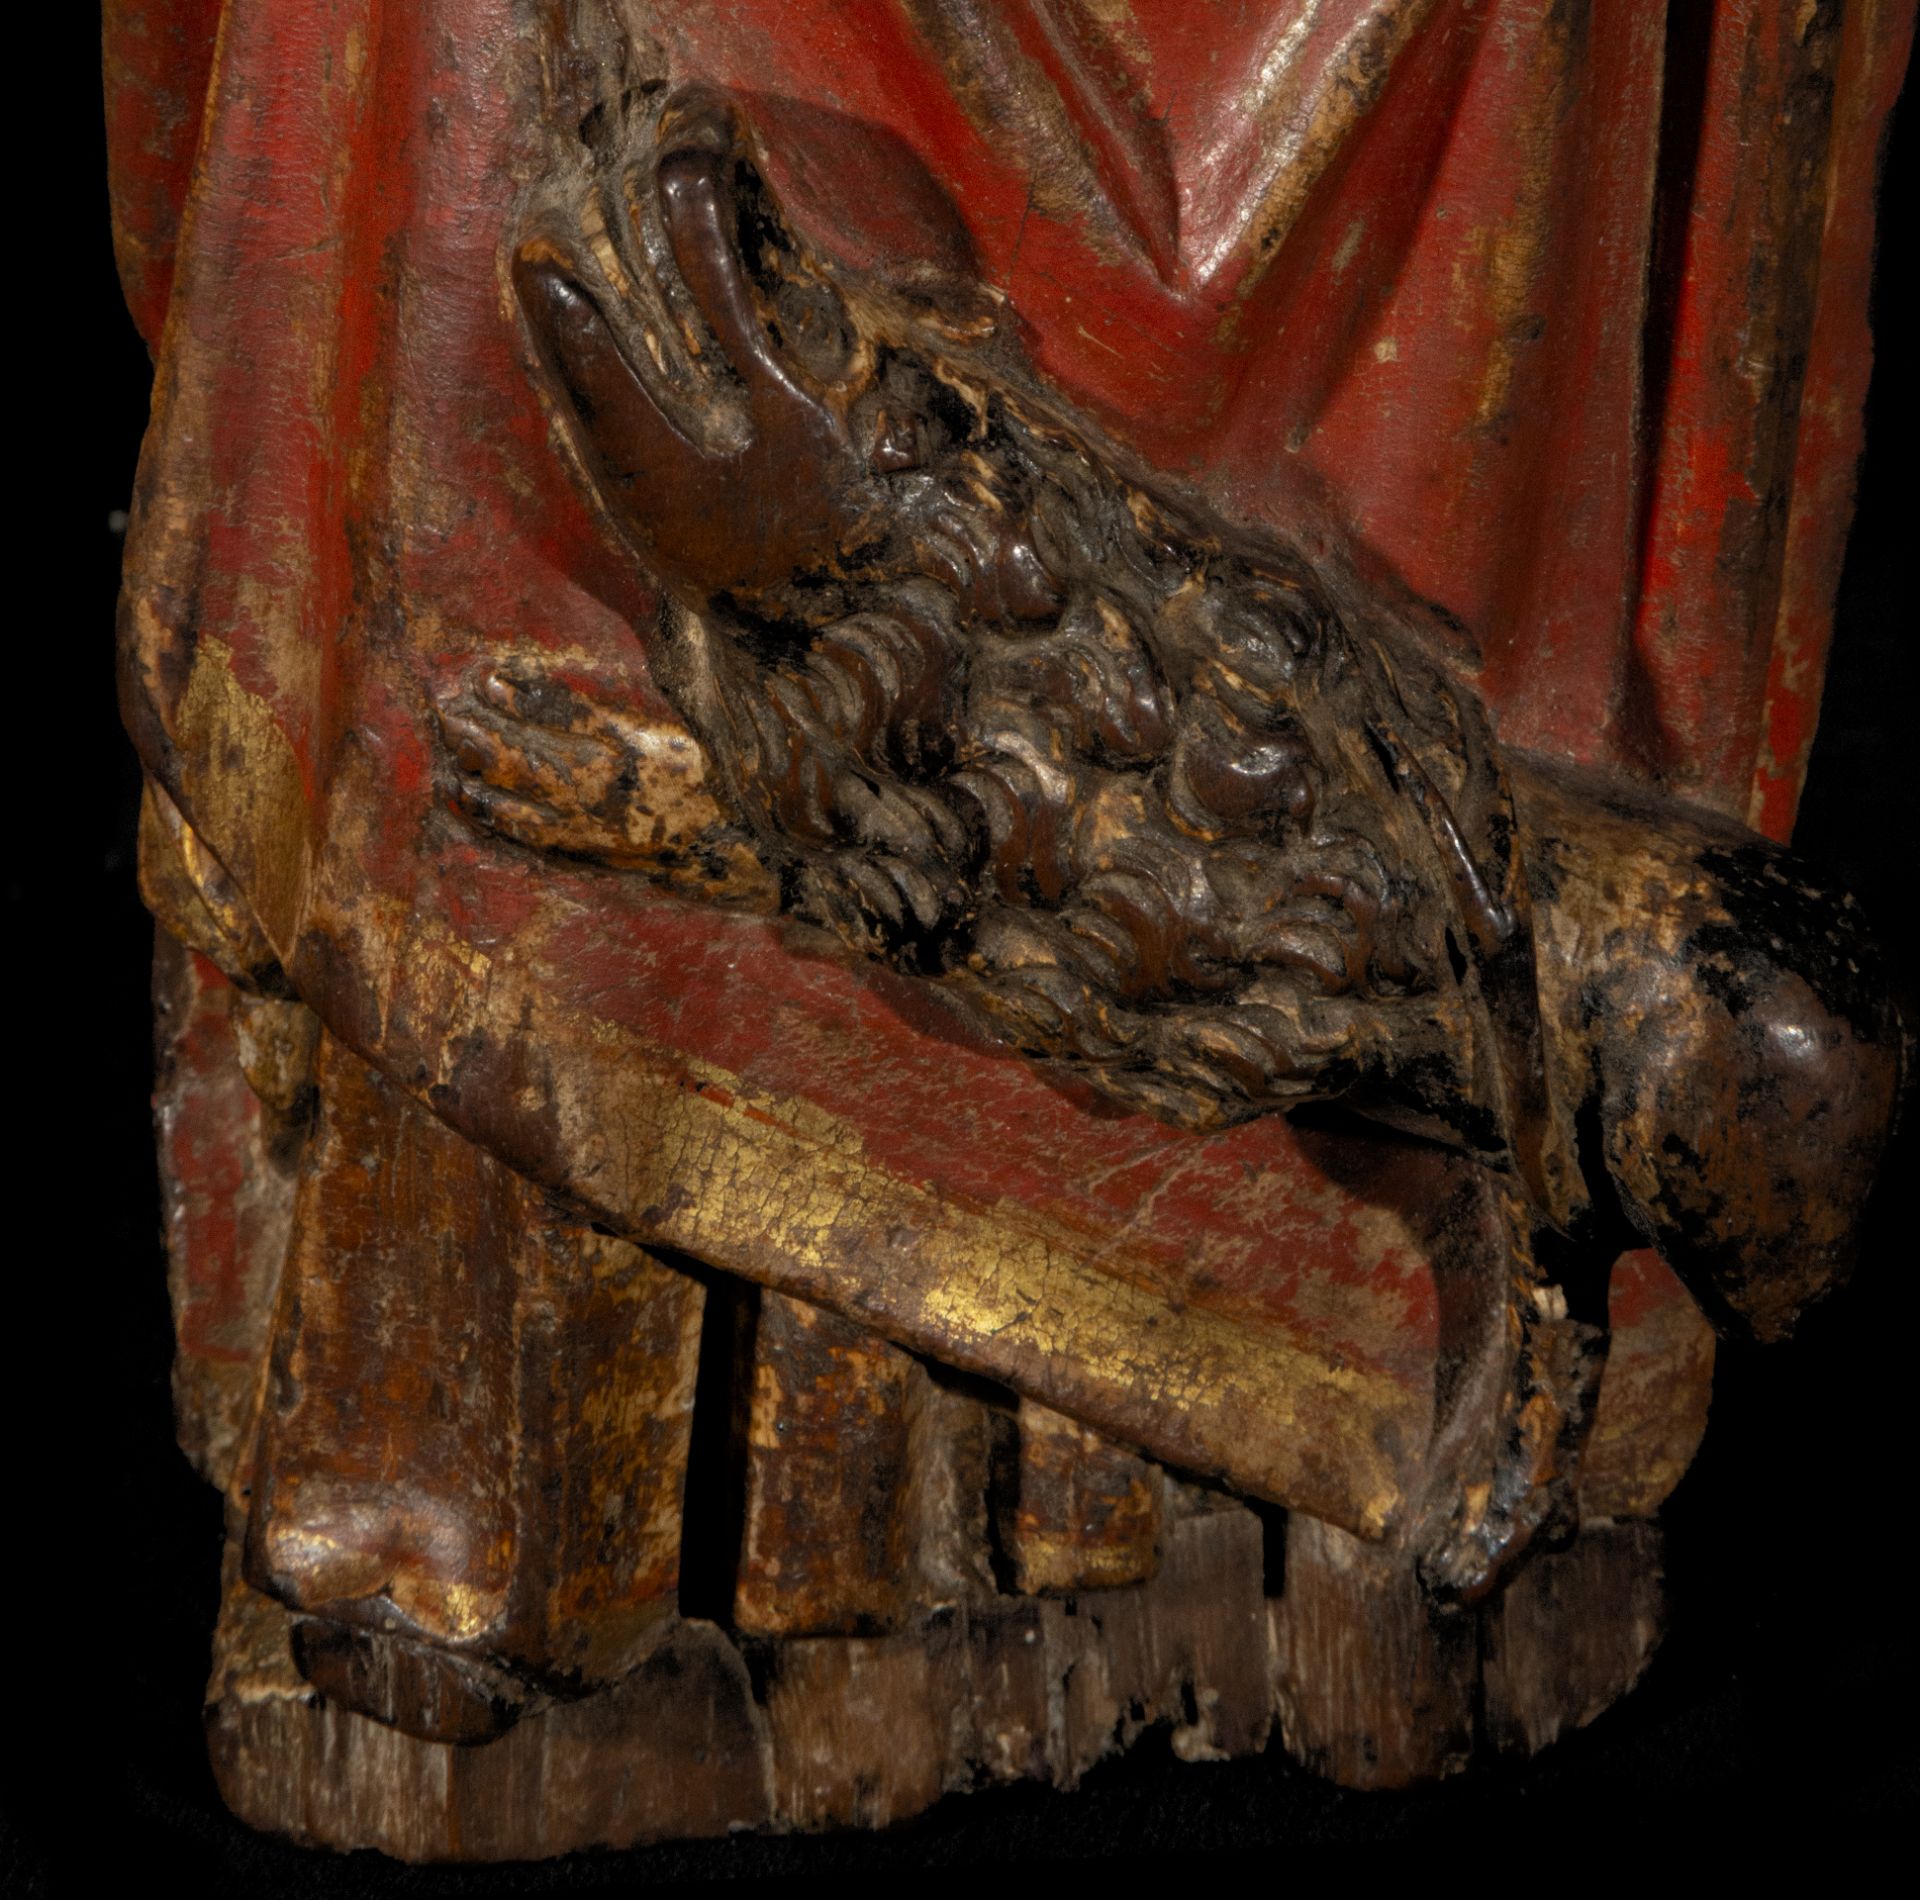 Spectacular Gothic Carving from Mechelen of Cardenal from the 15th century, with original polychrome - Image 6 of 7